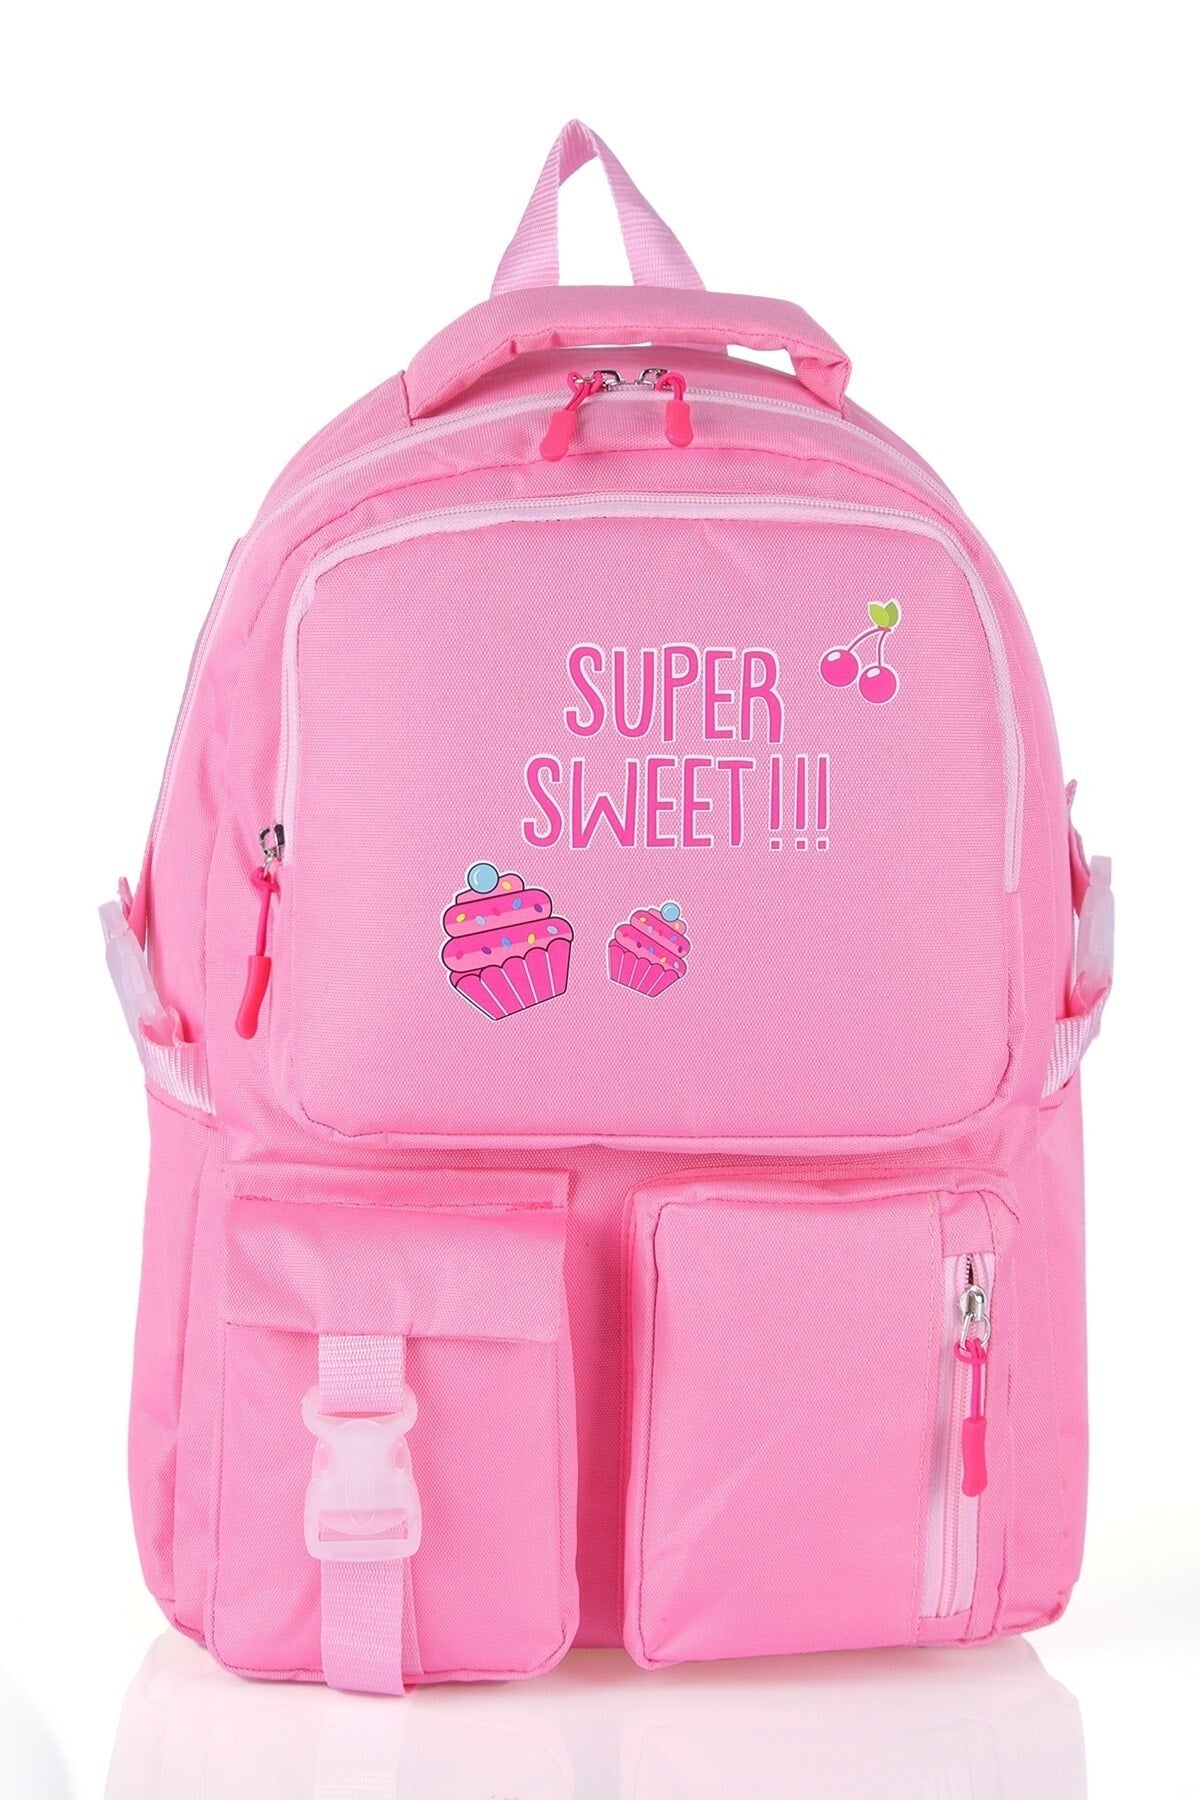 Hkn 9012 Primary School Backpack School Bag Multi Compartment Pink